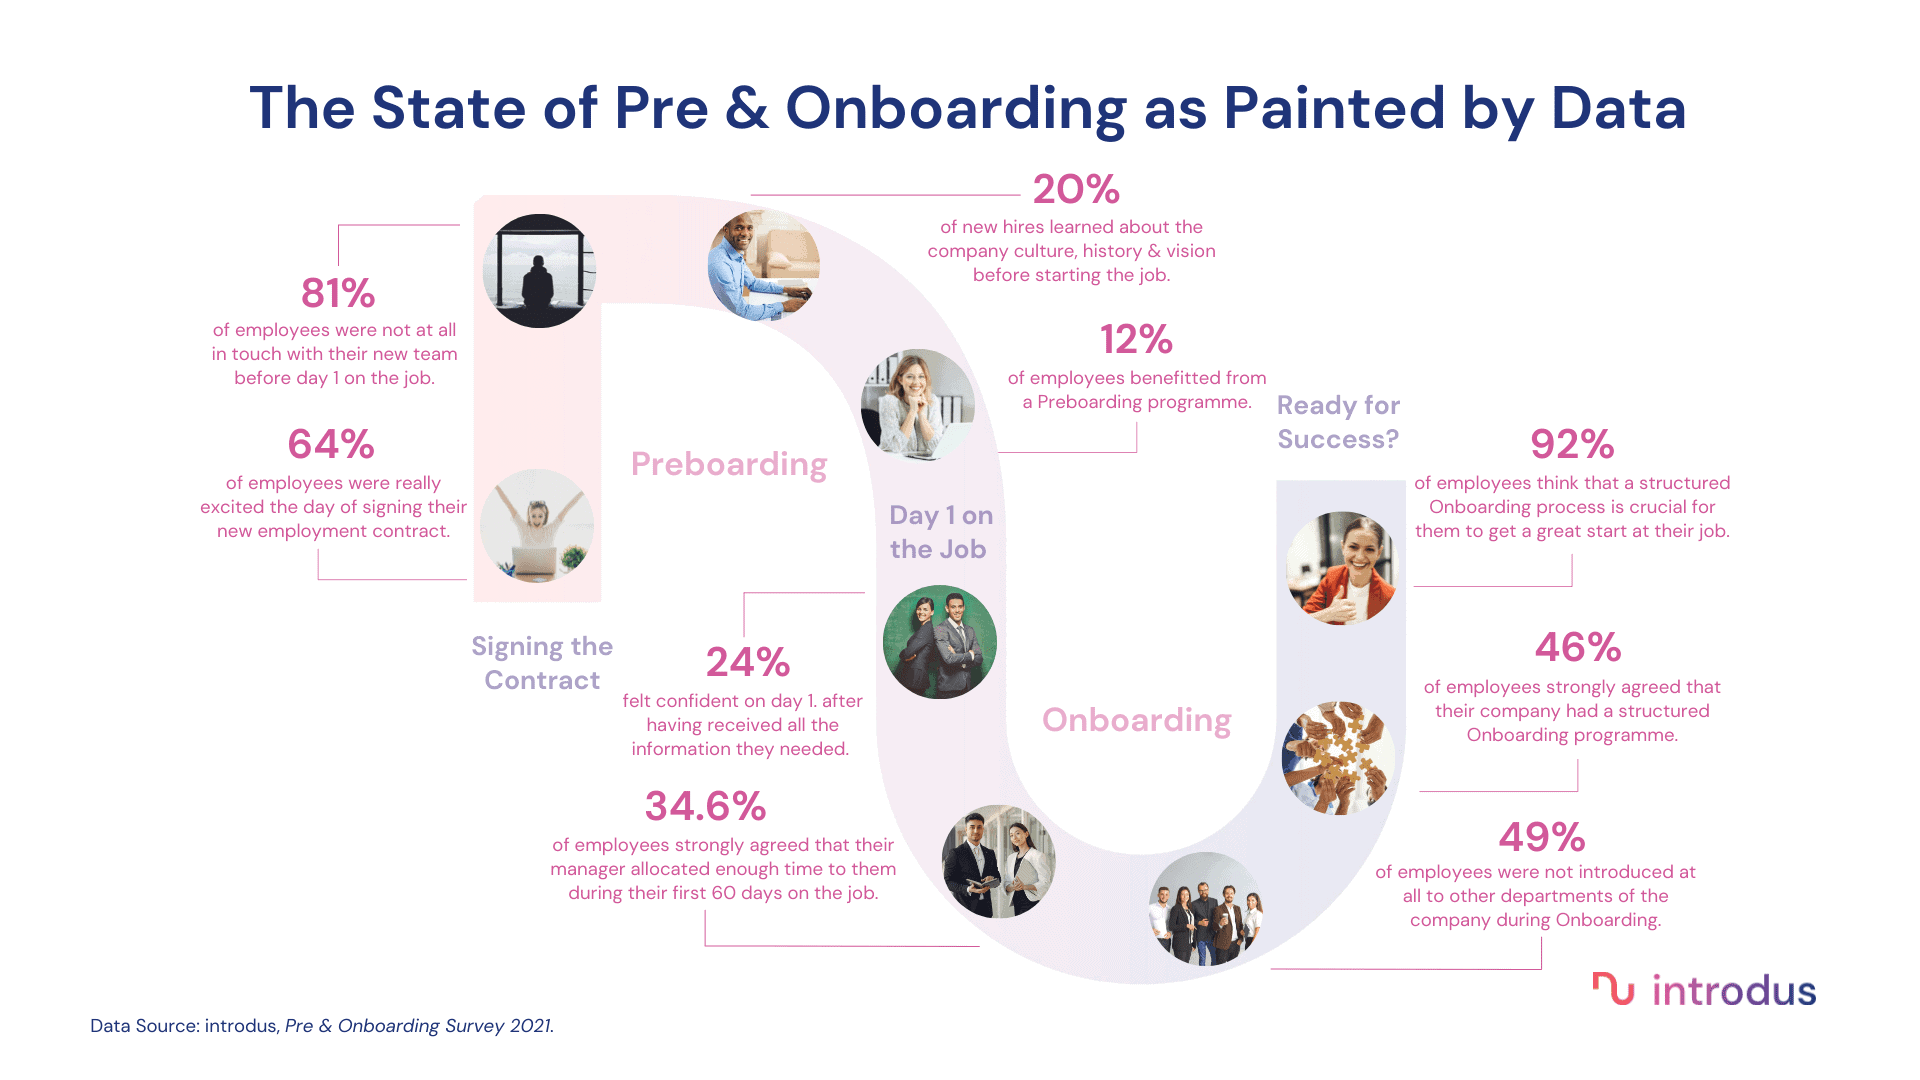 Data collected through the Pre & Onboarding Survey 2021 by introdus.